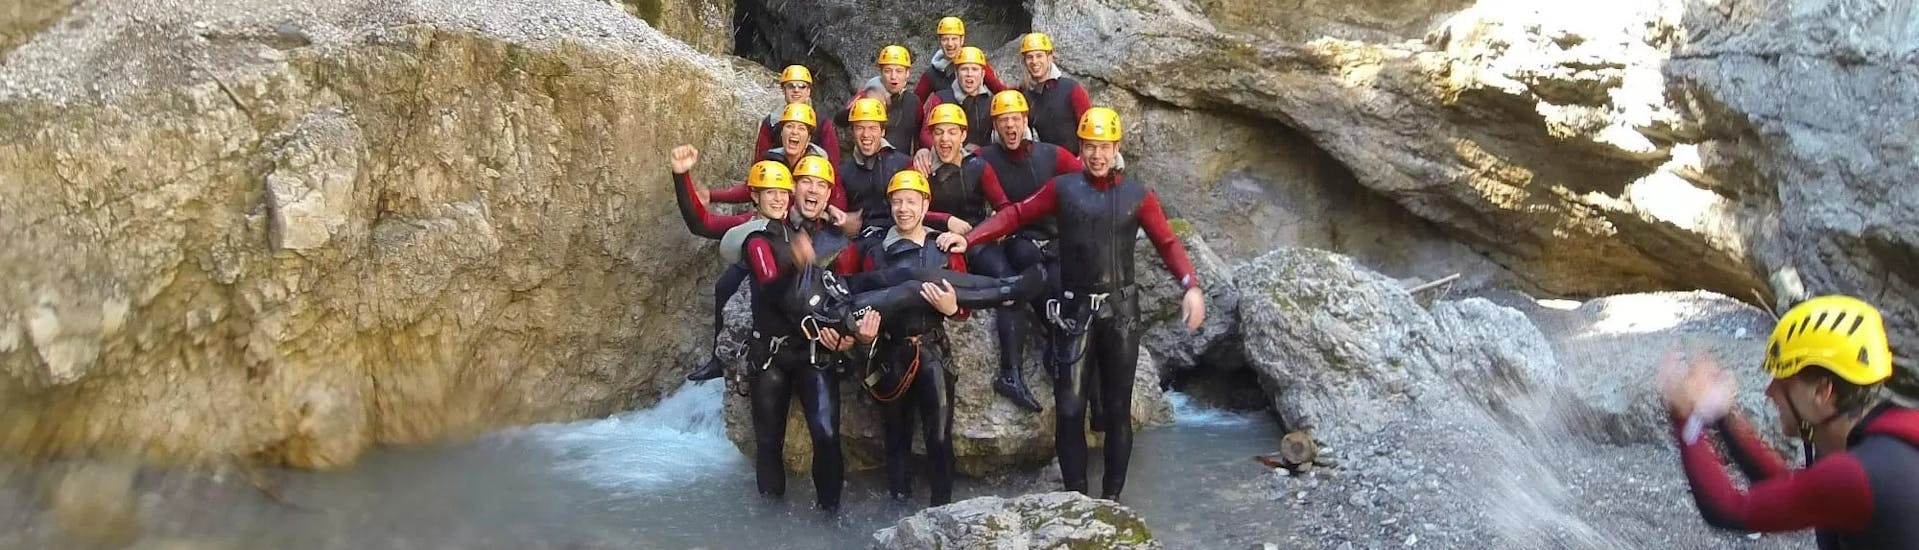 Group picture after an adventurous day while Canyoning in Taxaklamm at Kirchdorf with Mountain High Adventure Center Tirol.